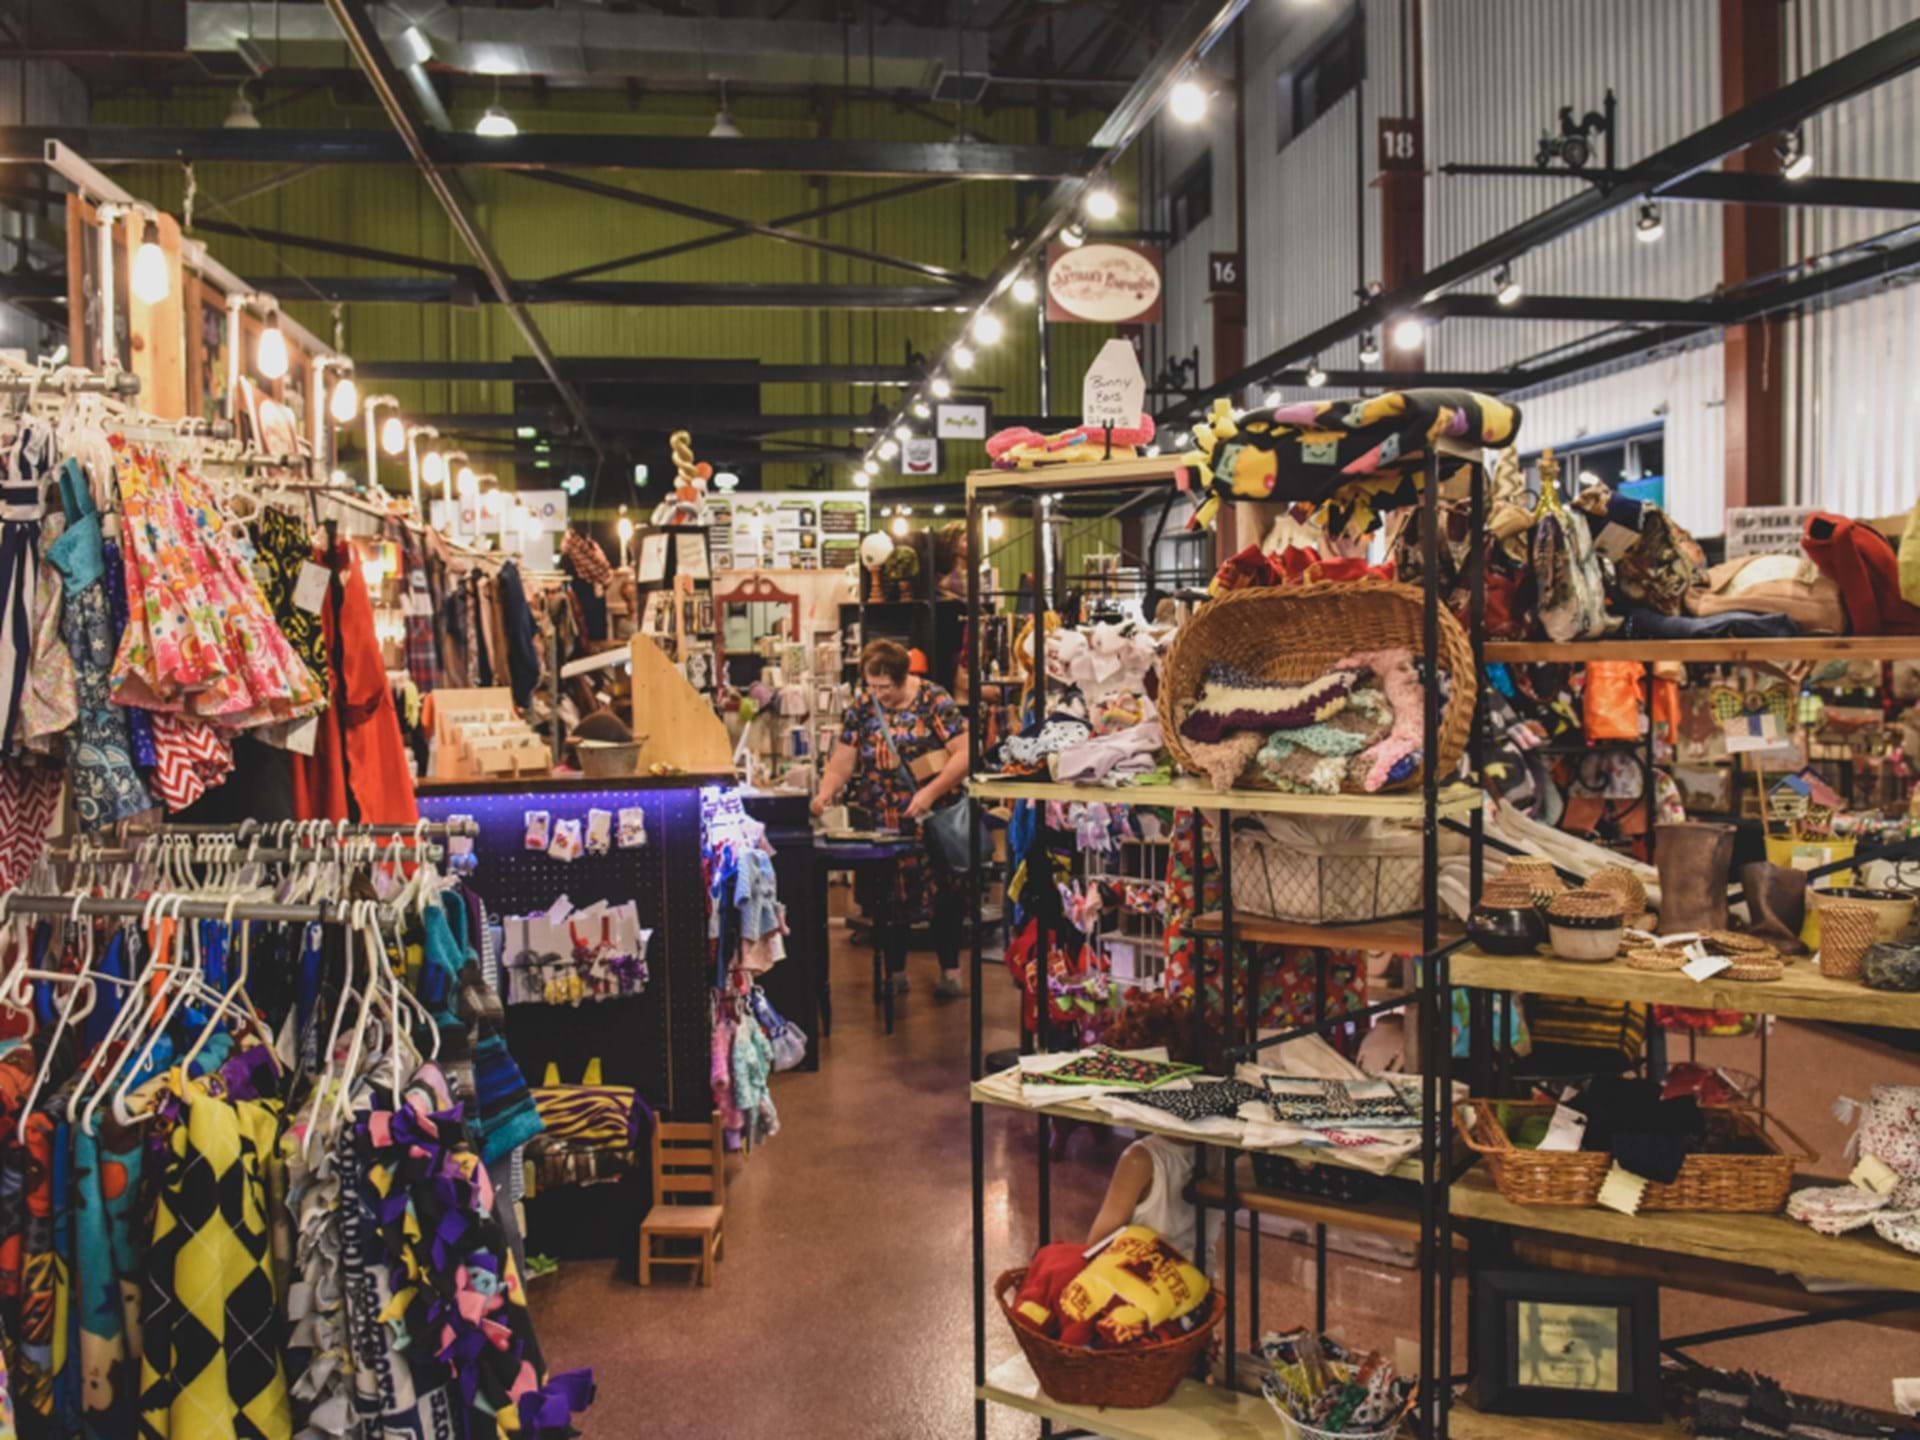 NewBo City Market is host to many local artisans and crafters selling their wares. 